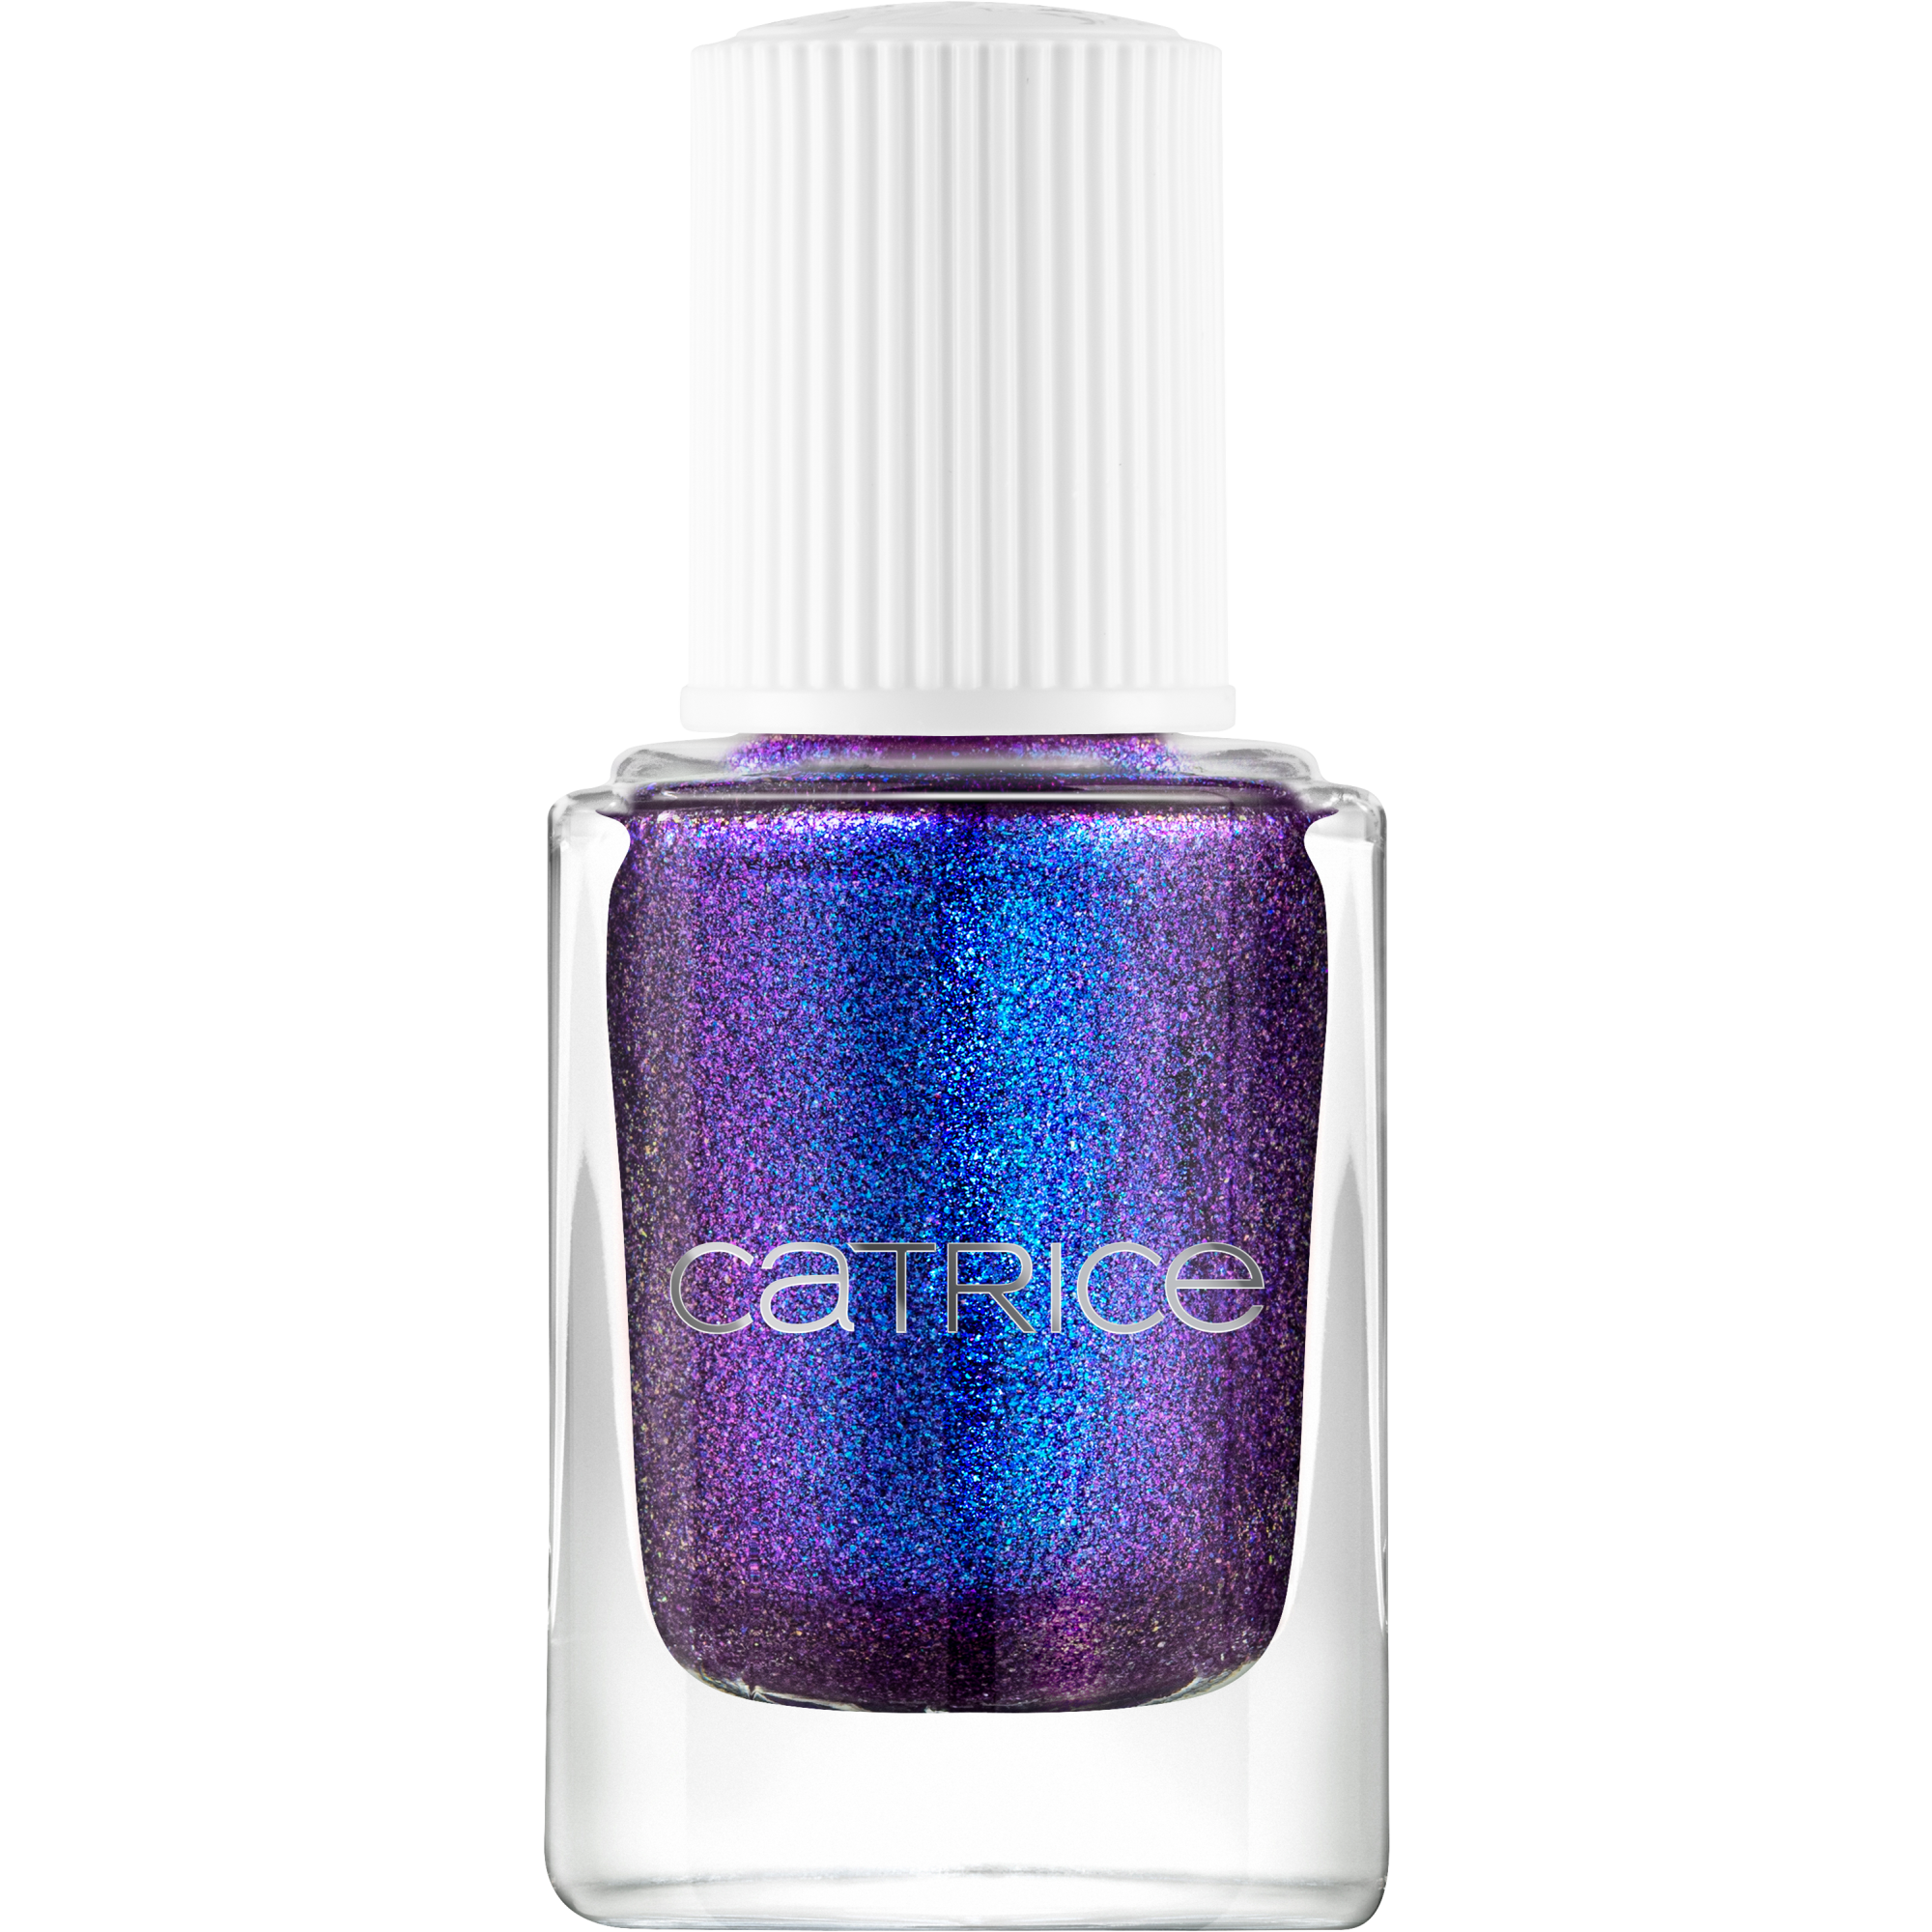 METAFACE Nail Lacquer